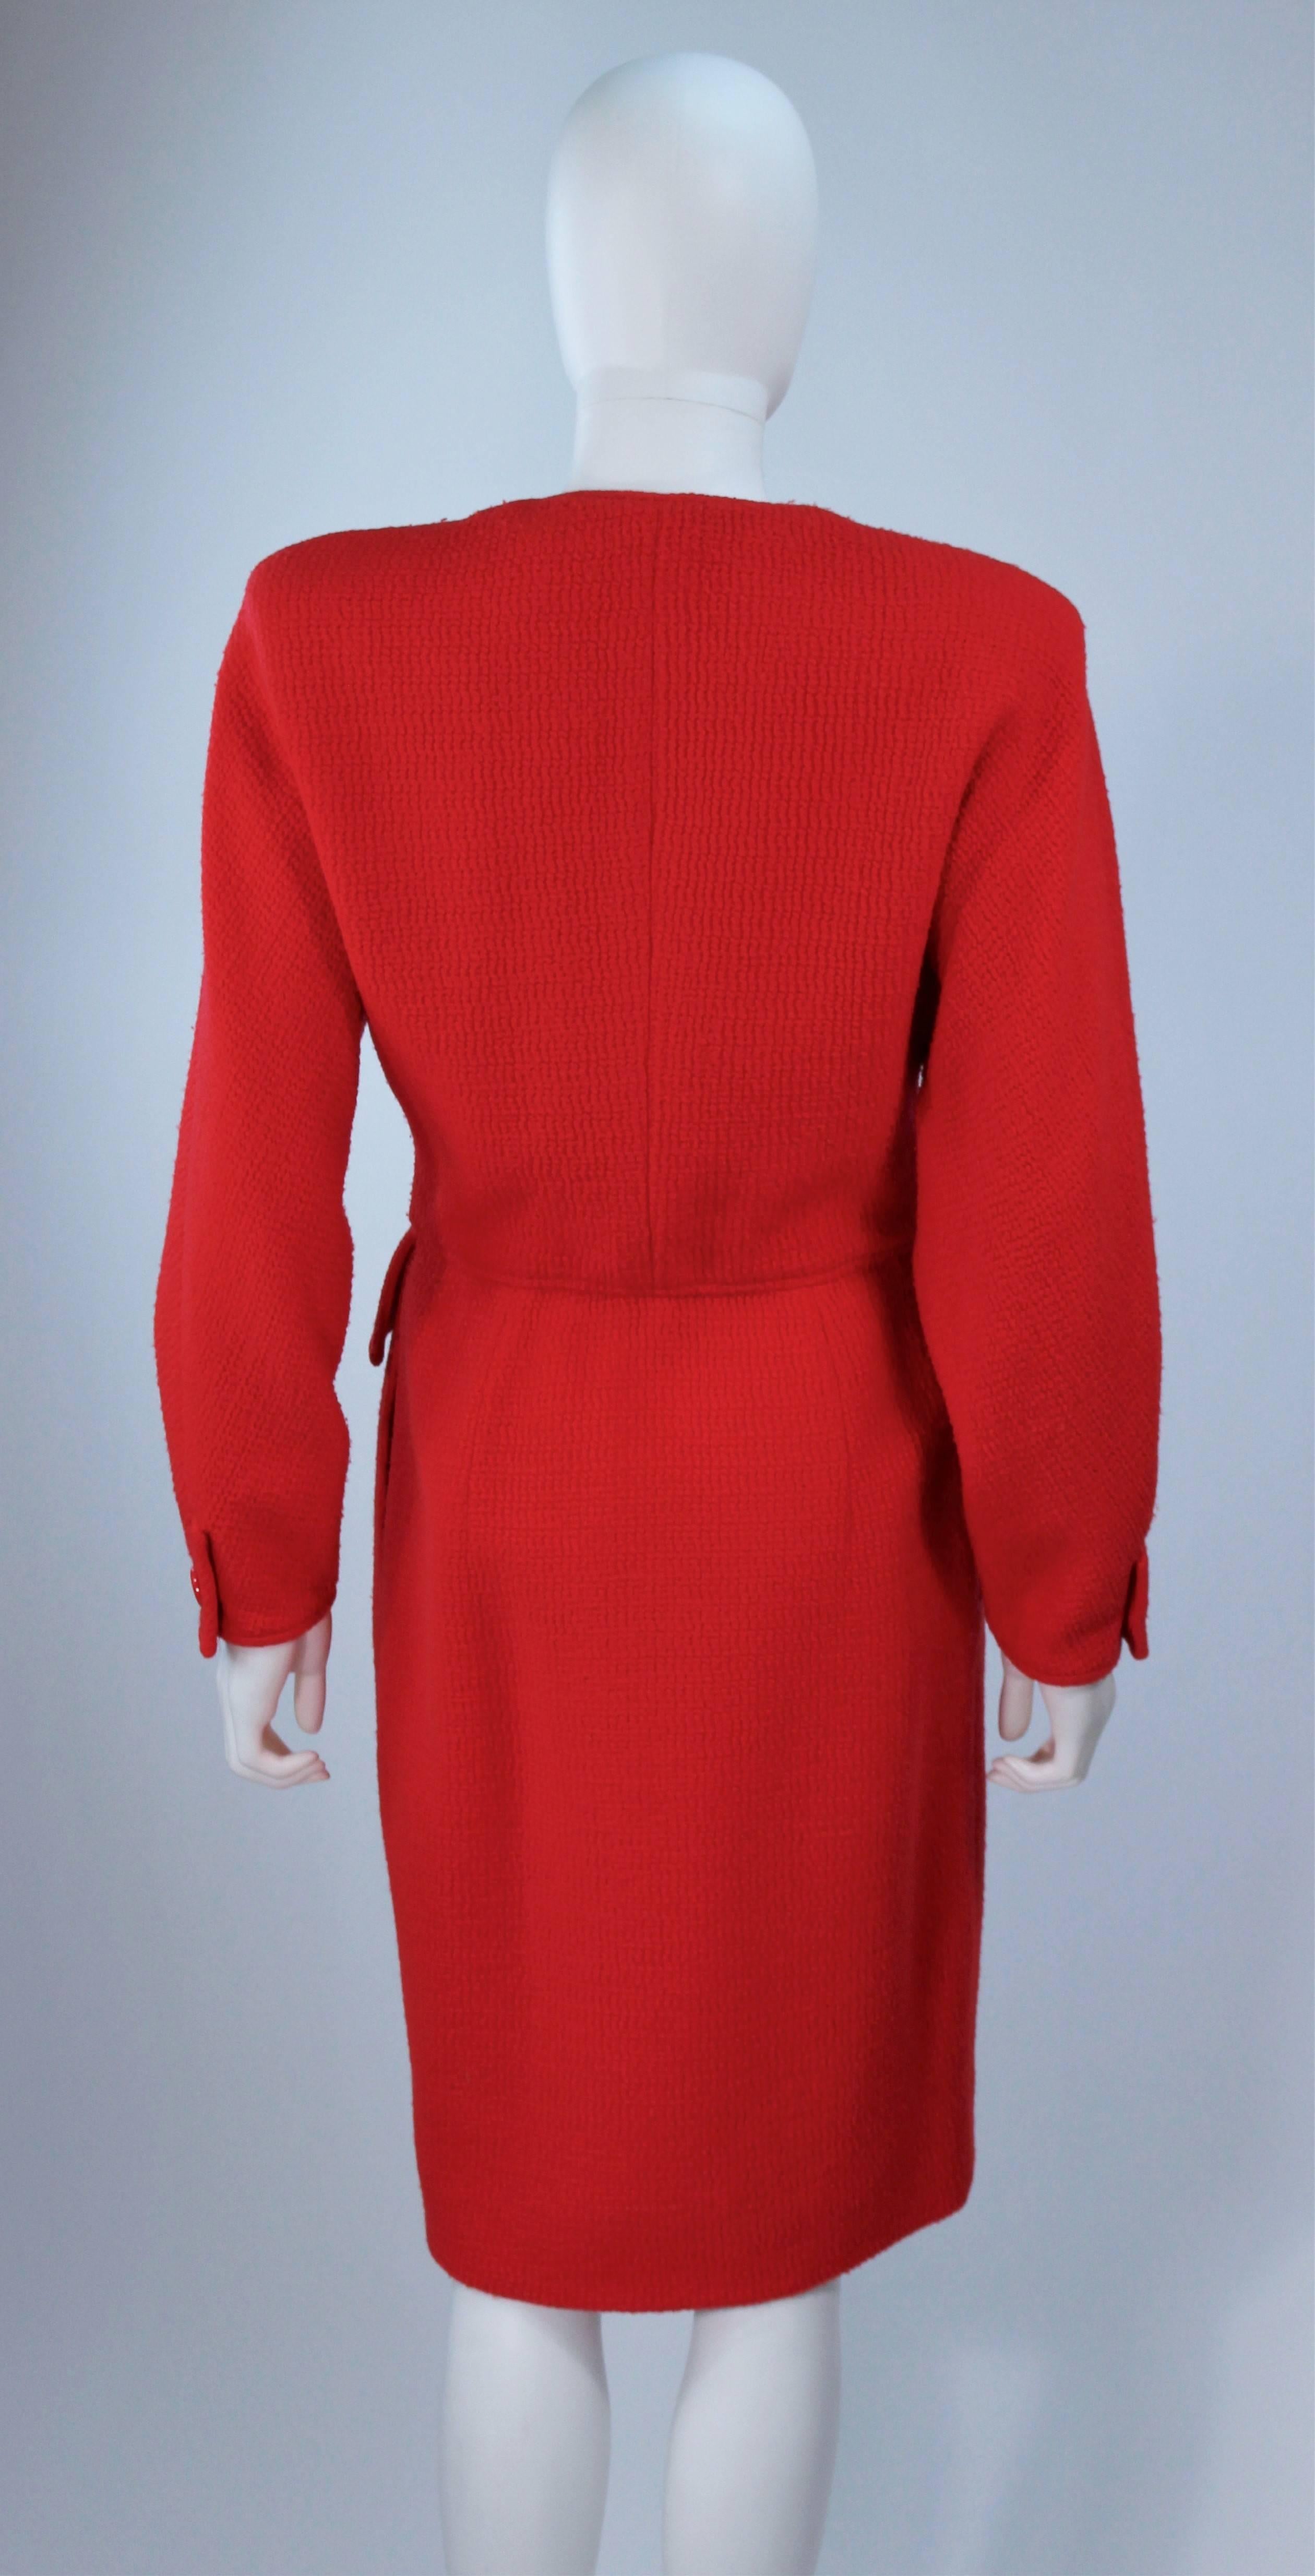 VALENTINO Red Wool Dress Size 6-8 For Sale 1